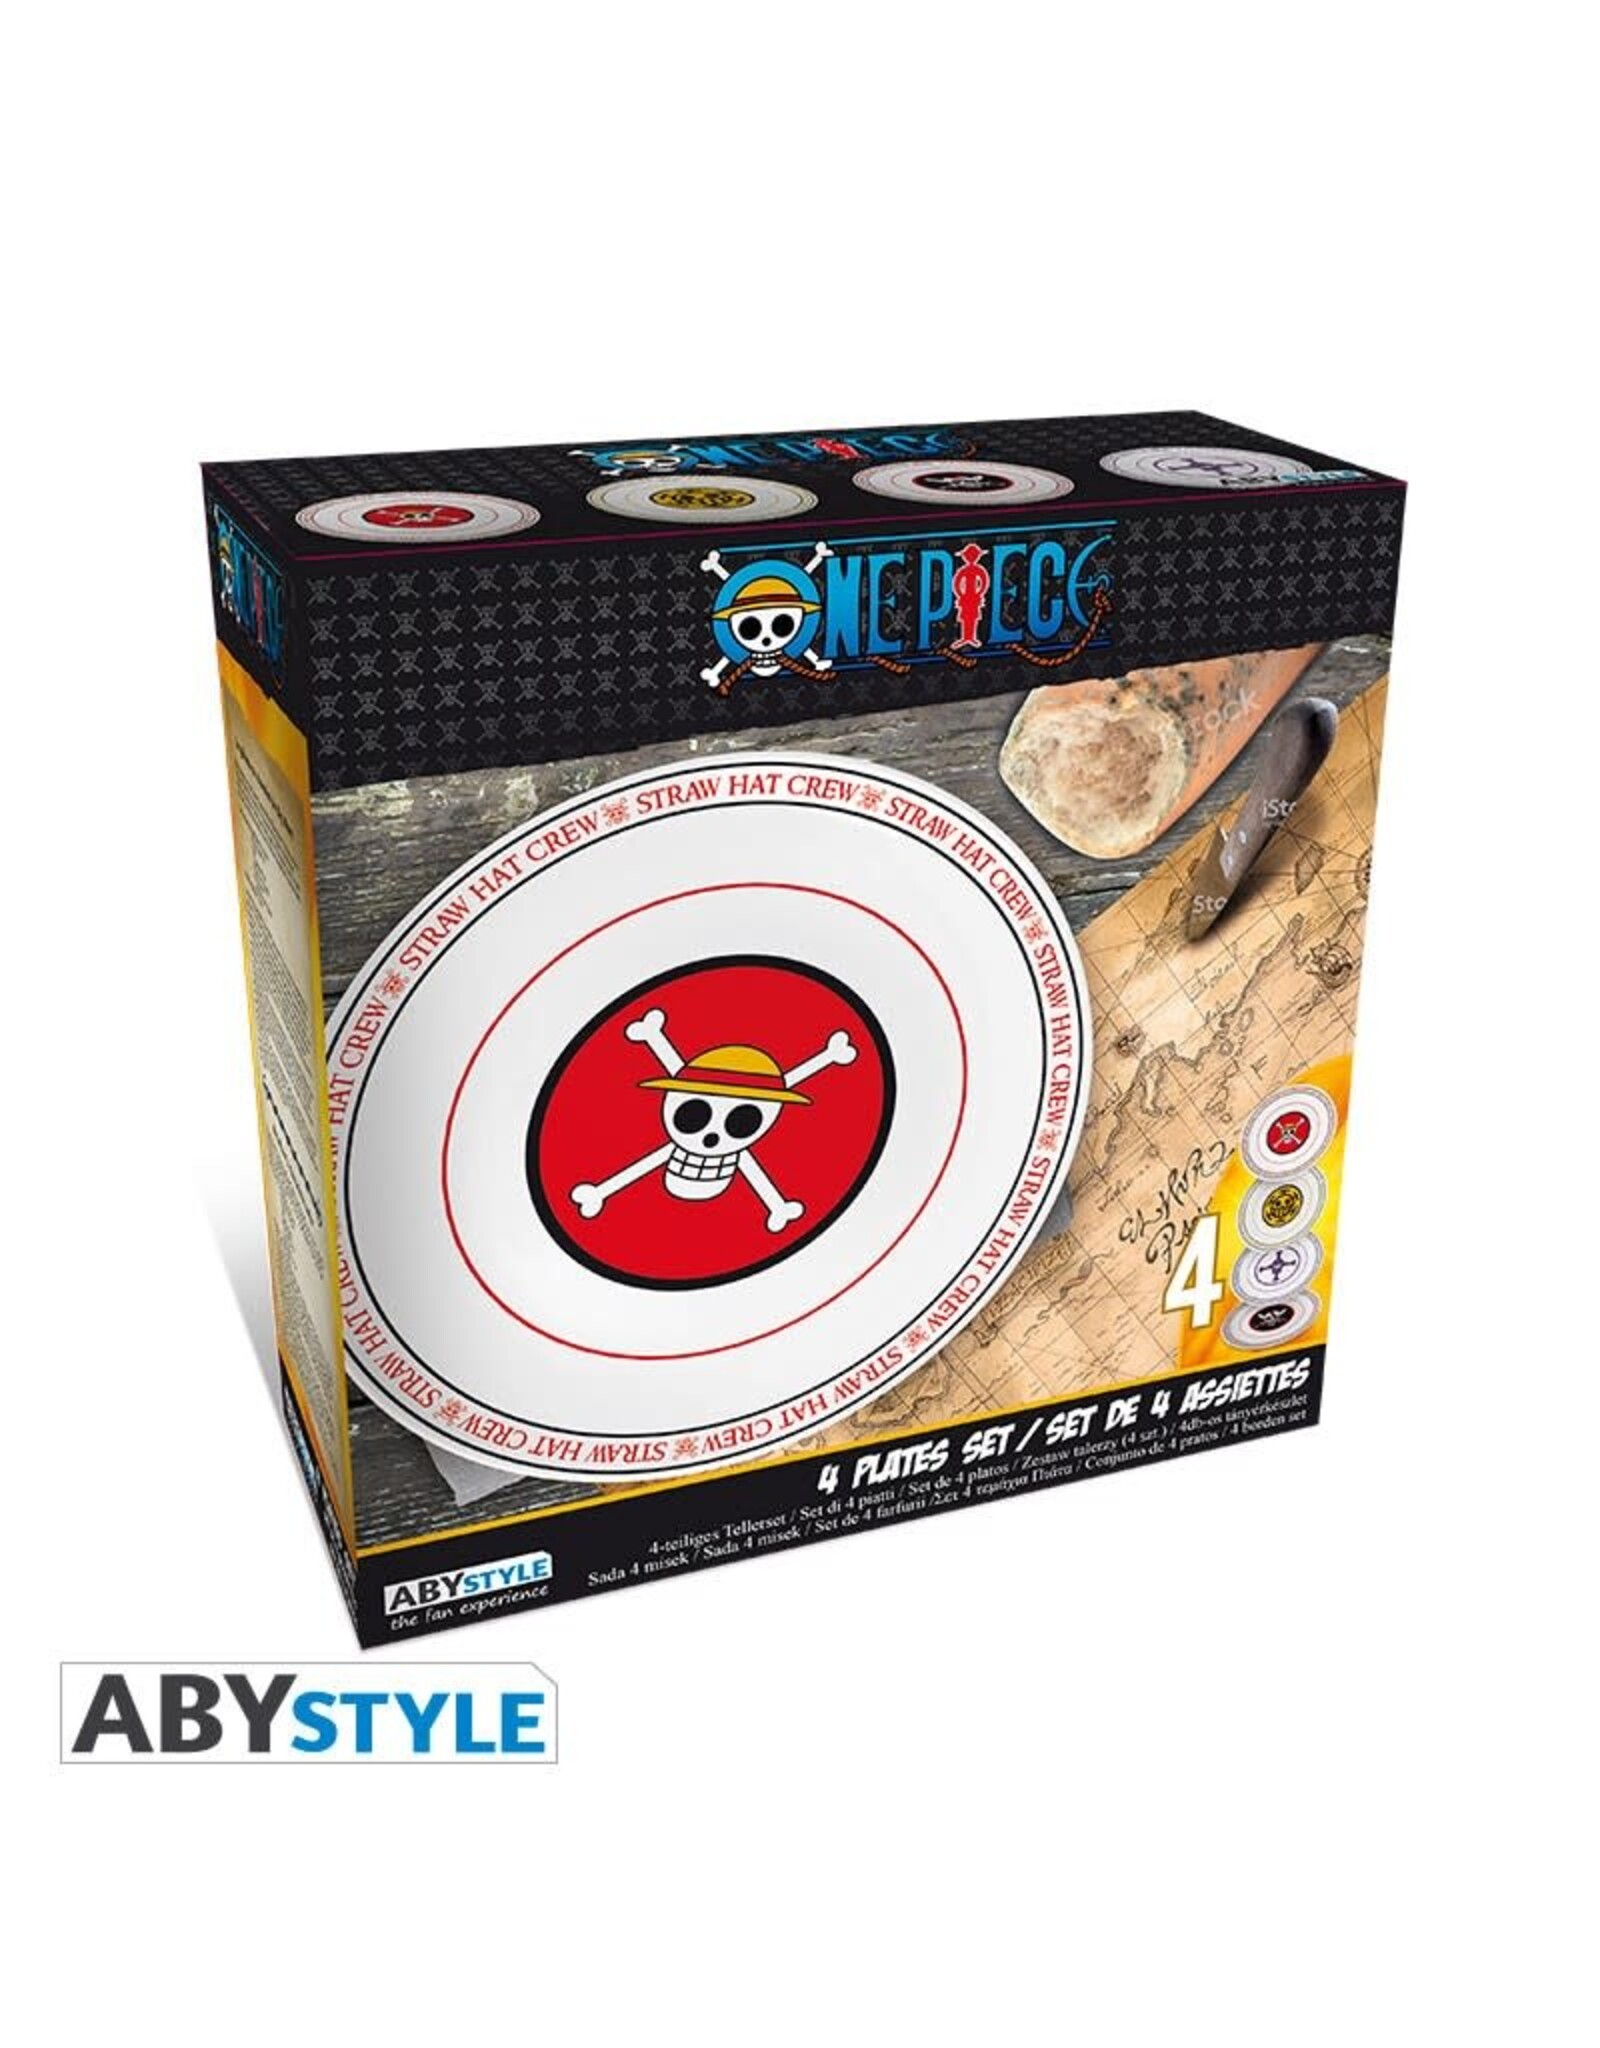 Abysse America One Piece - Pirate Emblems Plates